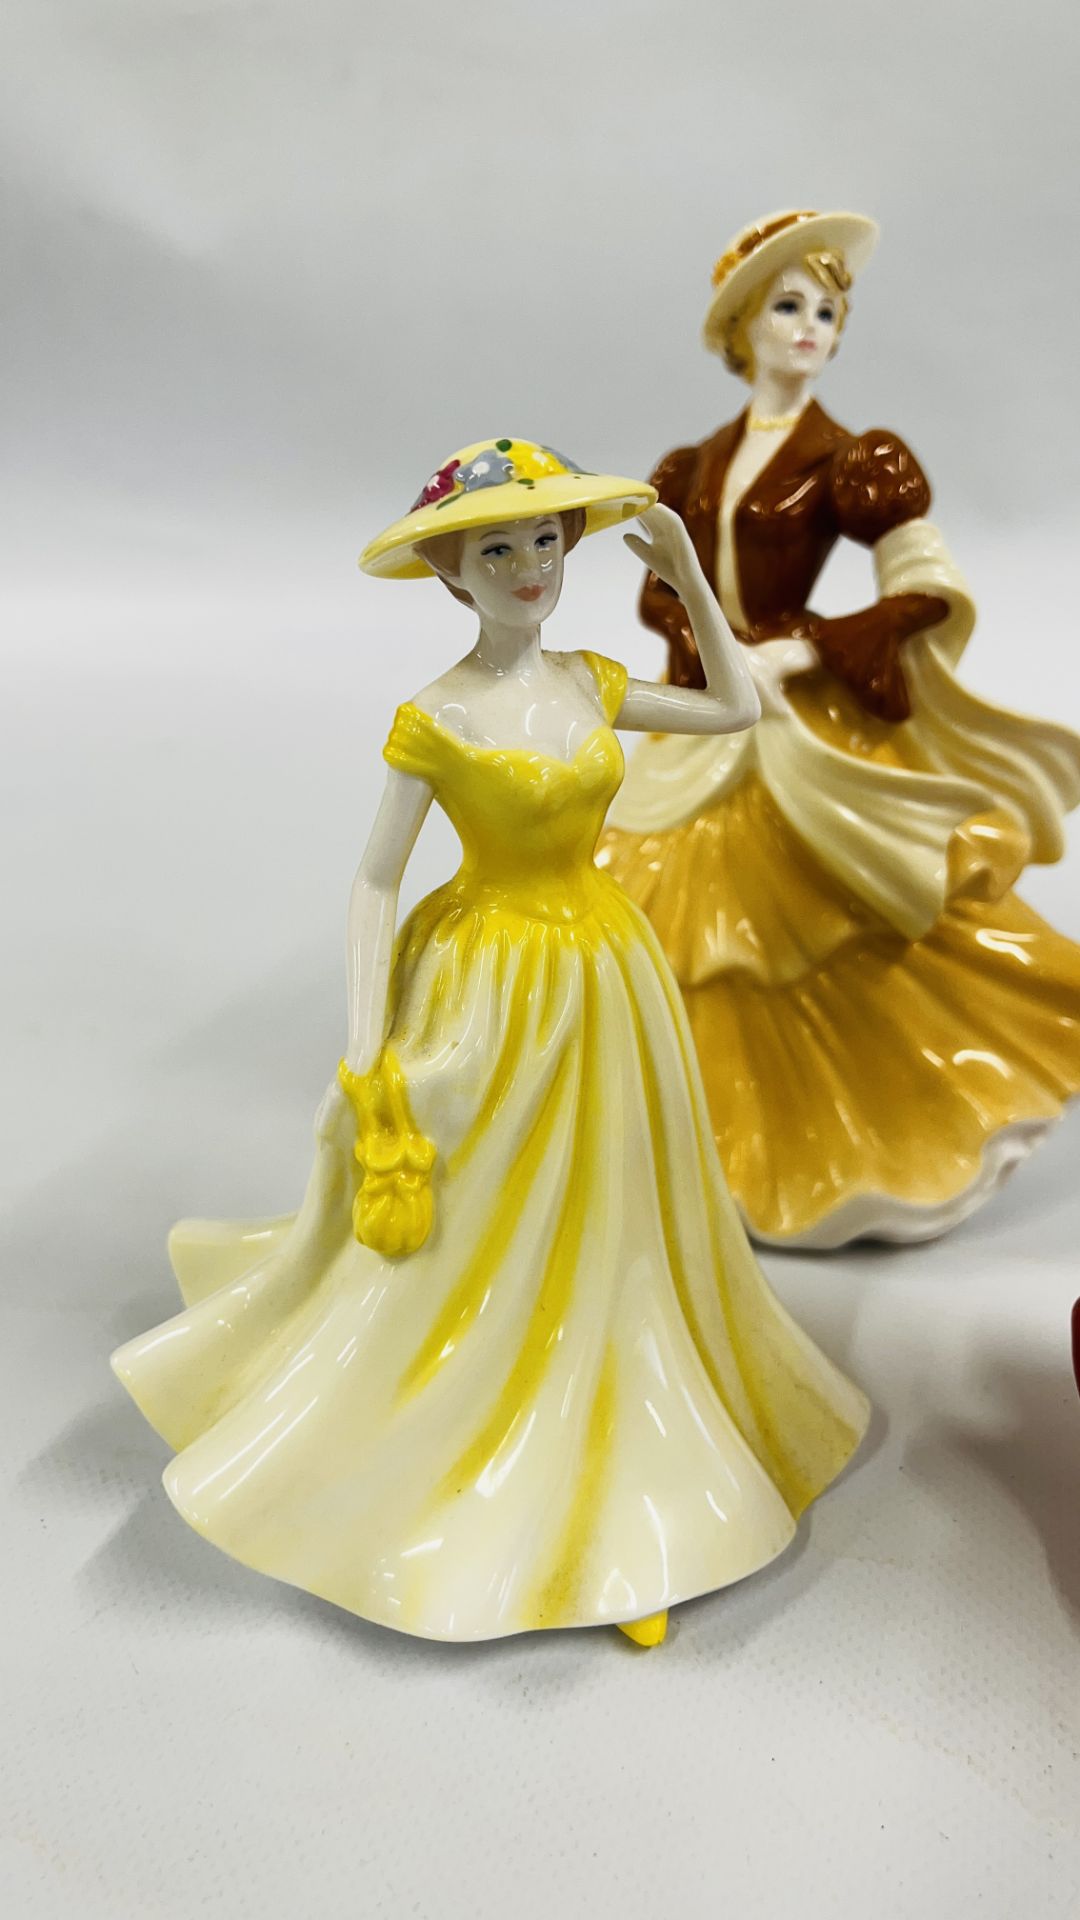 3 ROYAL DOULTON CABINET COLLECTORS FIGURES TO INCLUDE "SUMMER BREEZE" HN 4587, - Image 4 of 9